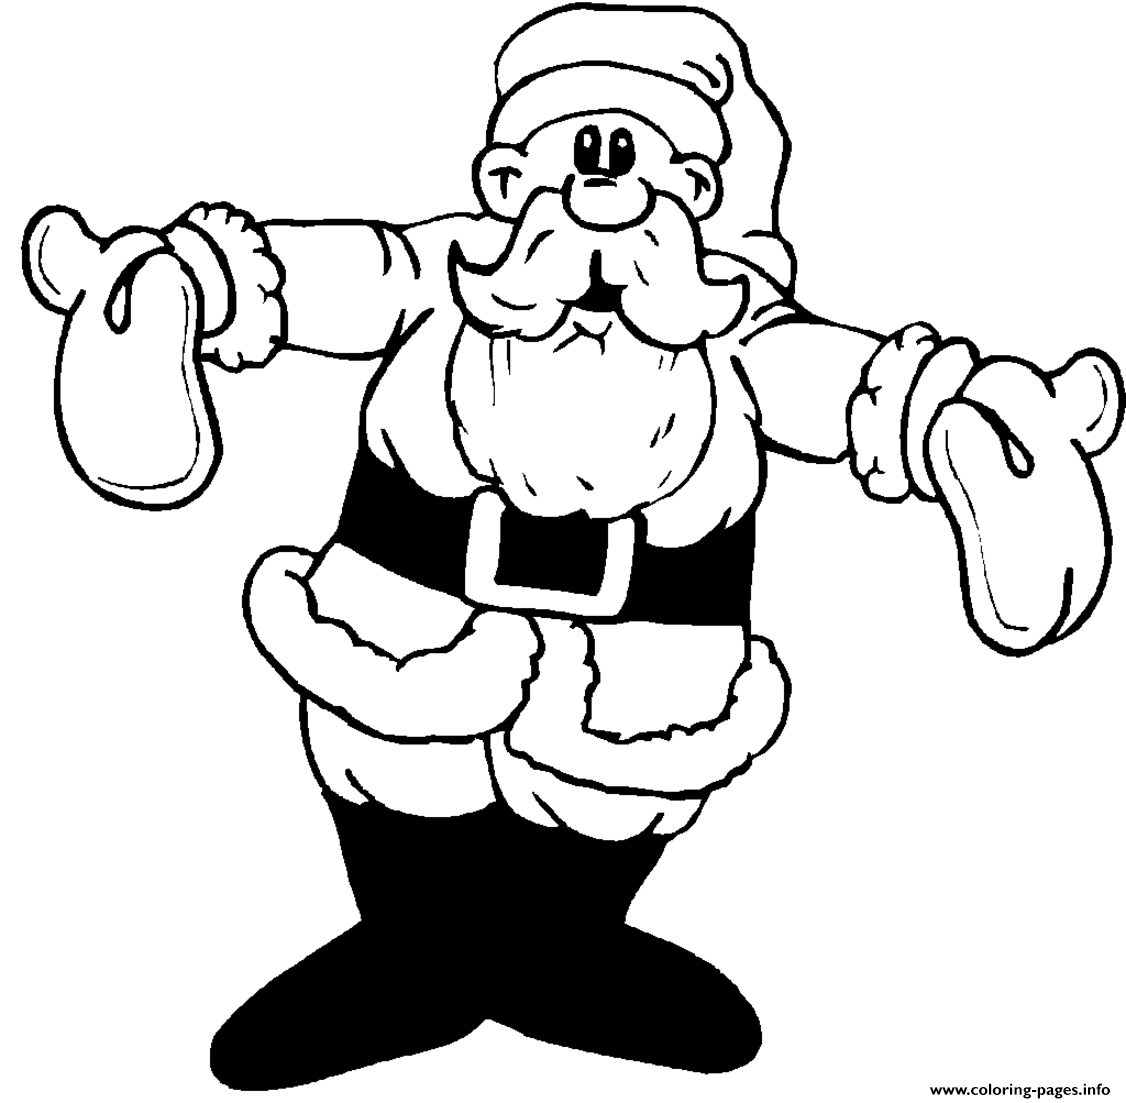 Warm Santa Christmas S For Kids5d2f coloring